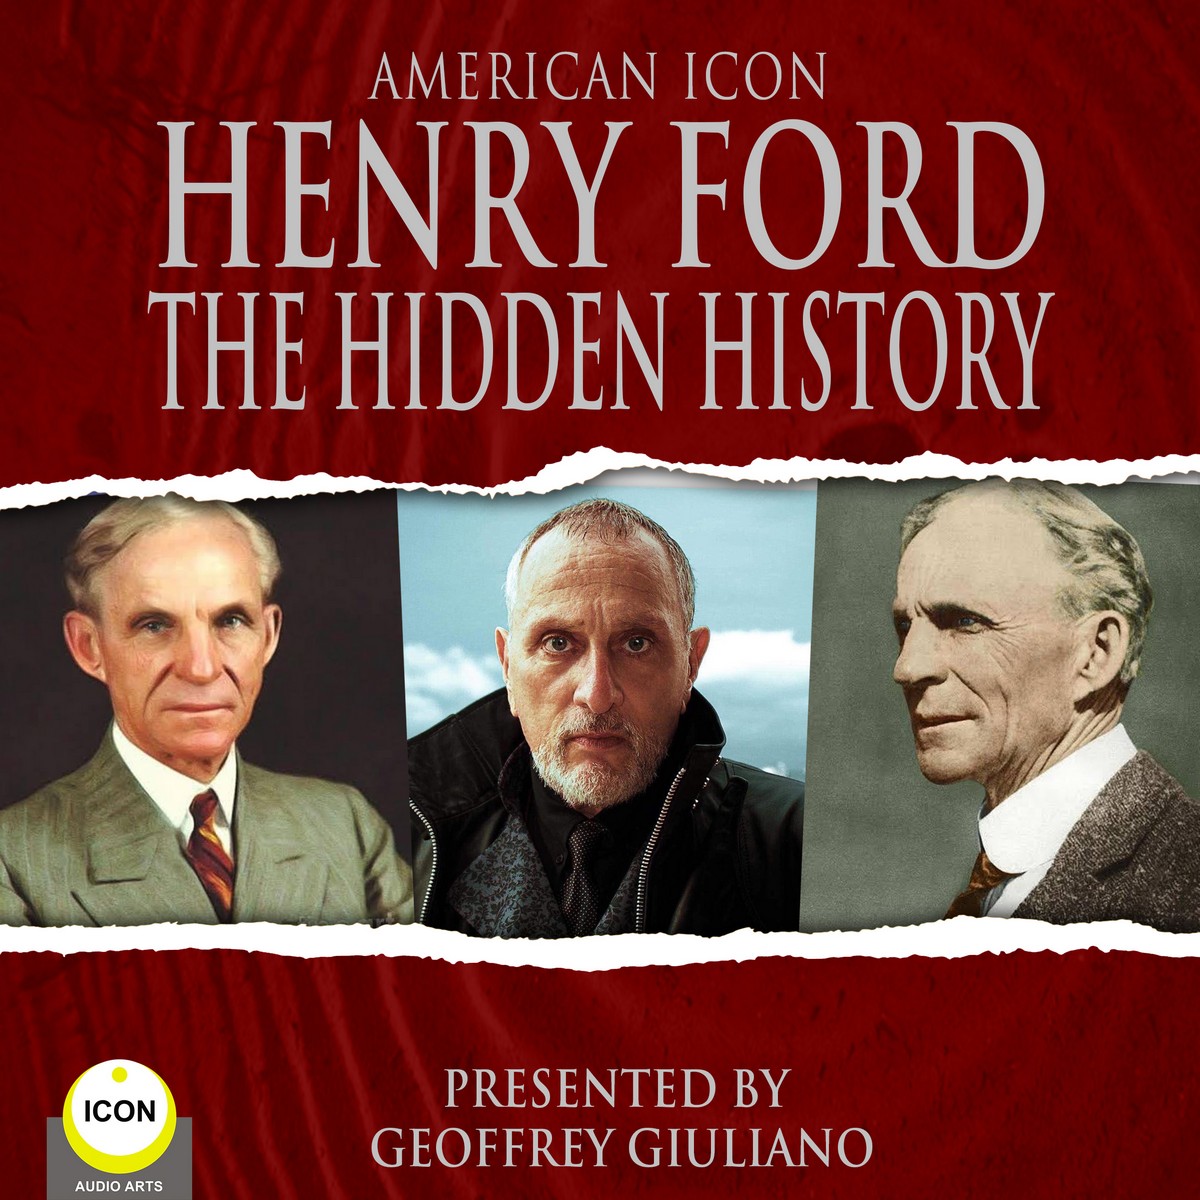 American Icon Henry Ford The Hidden History